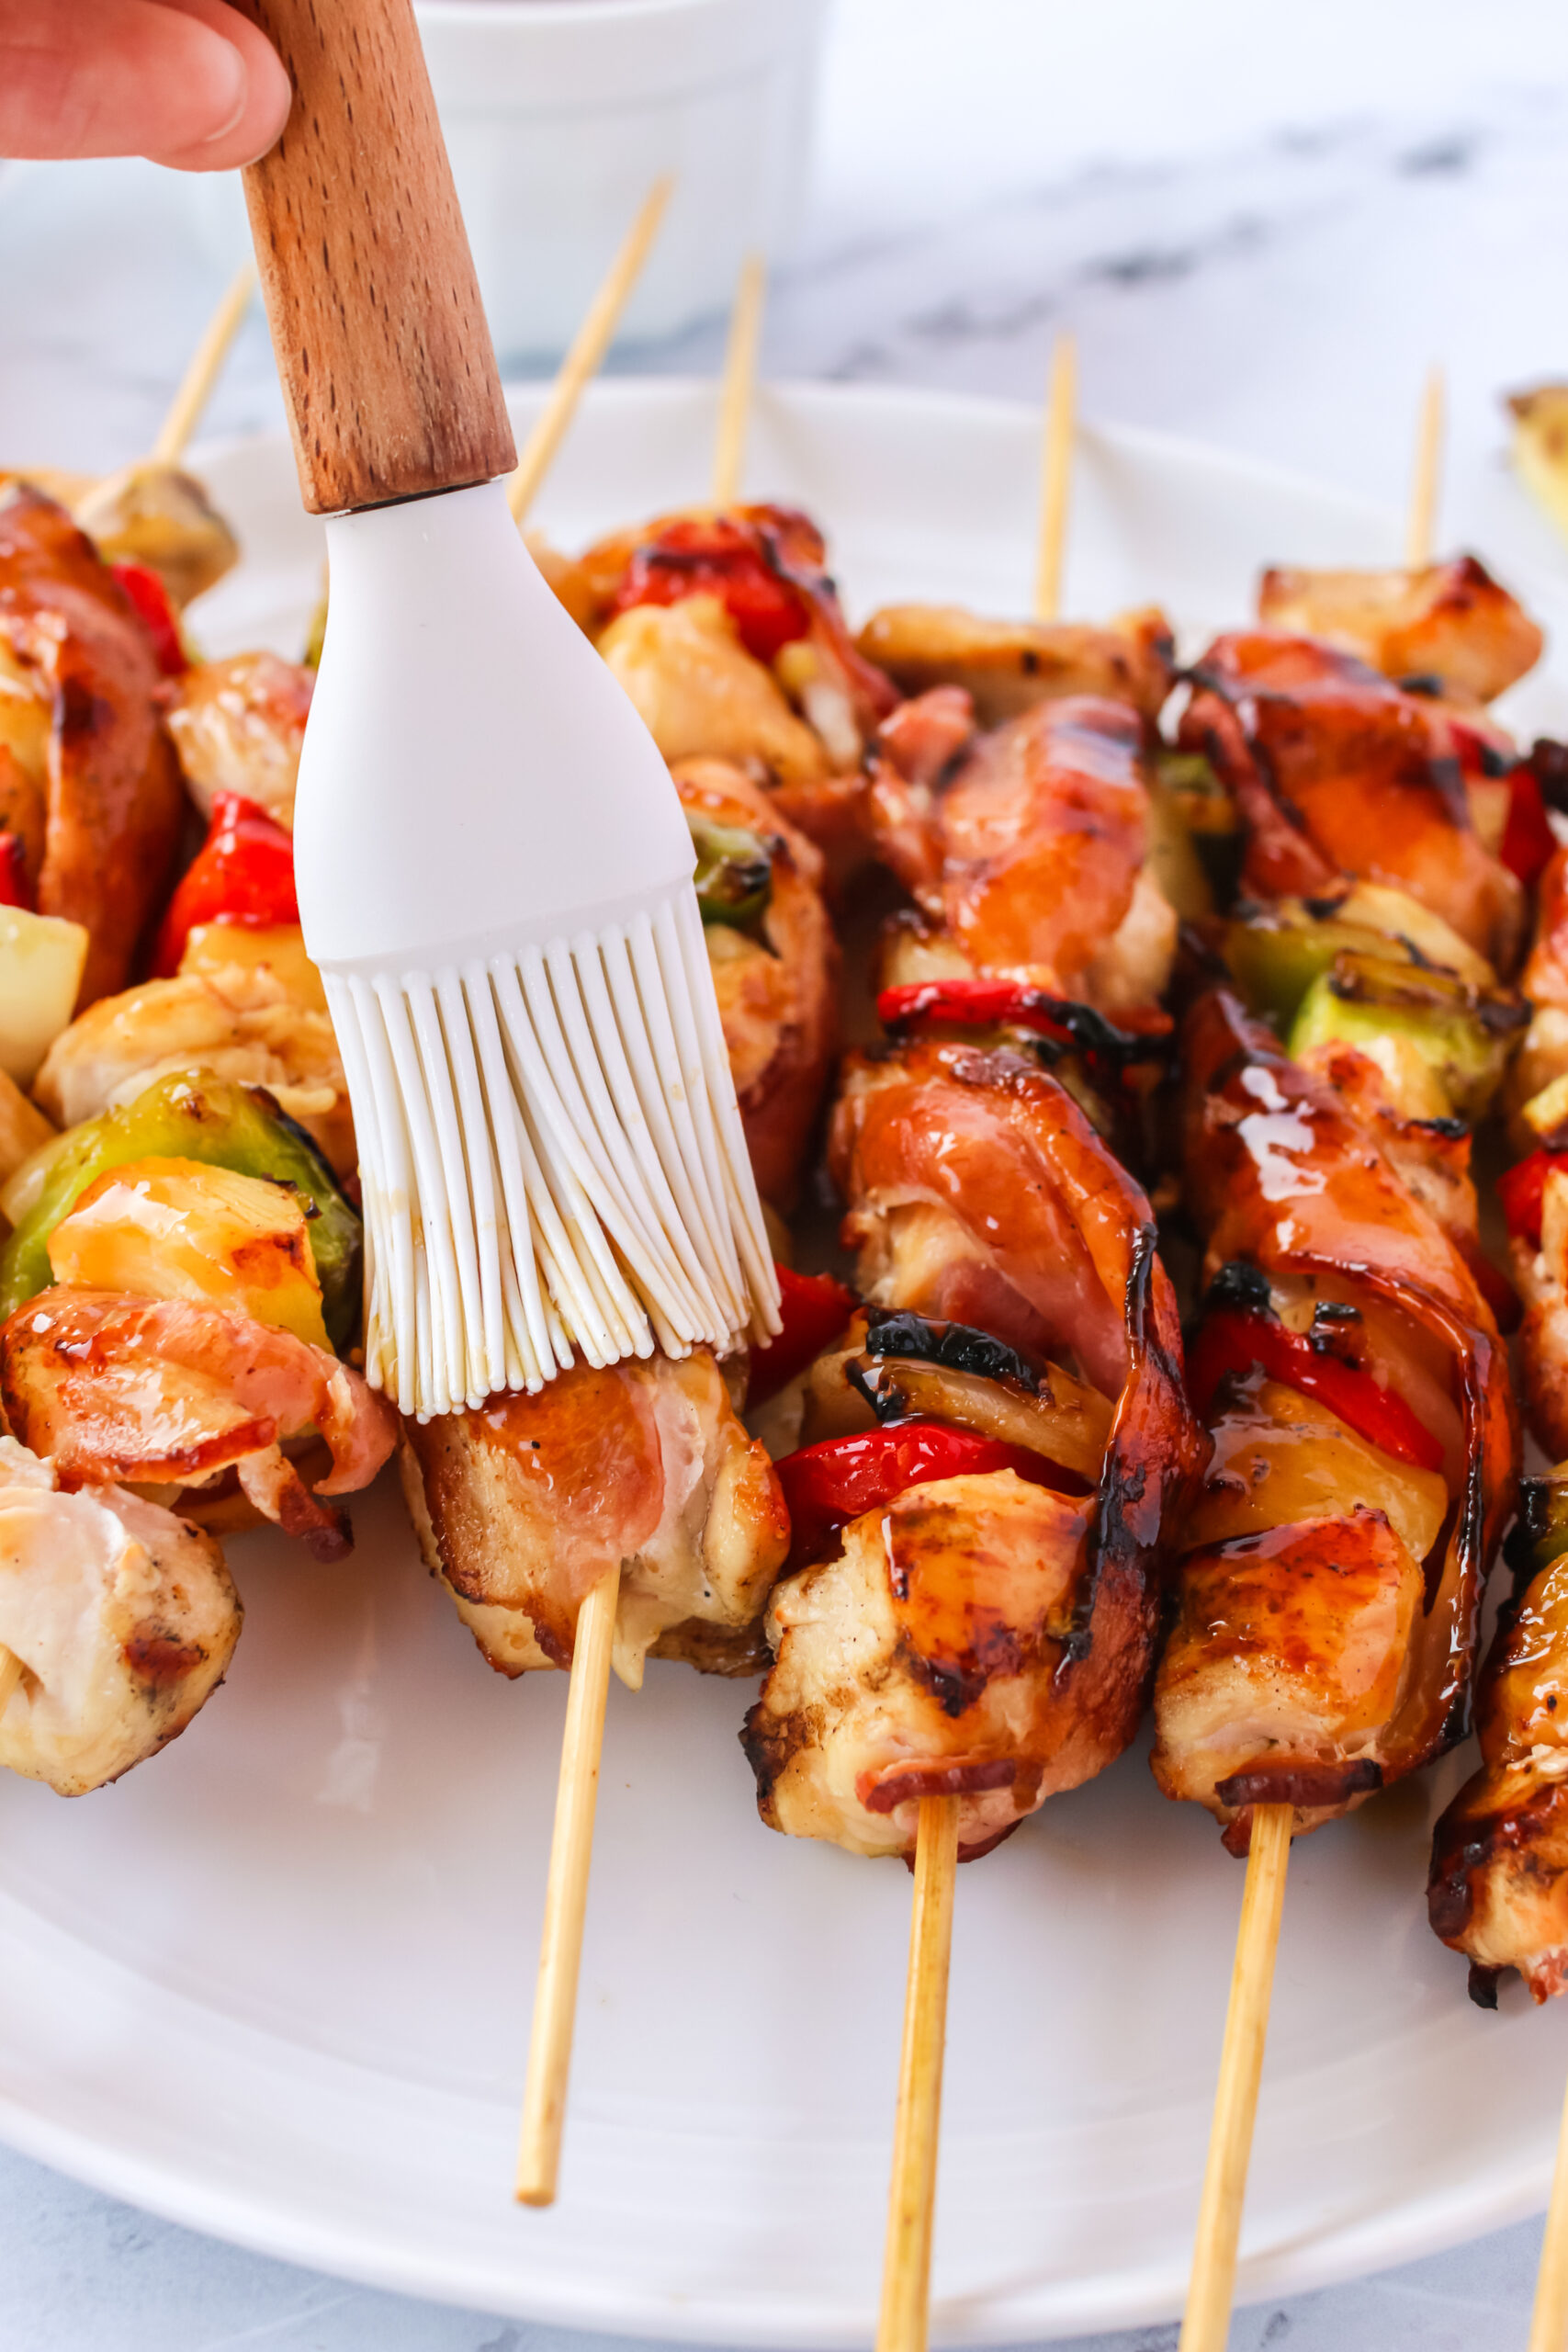 basting kebabs after cooking with additional glaze